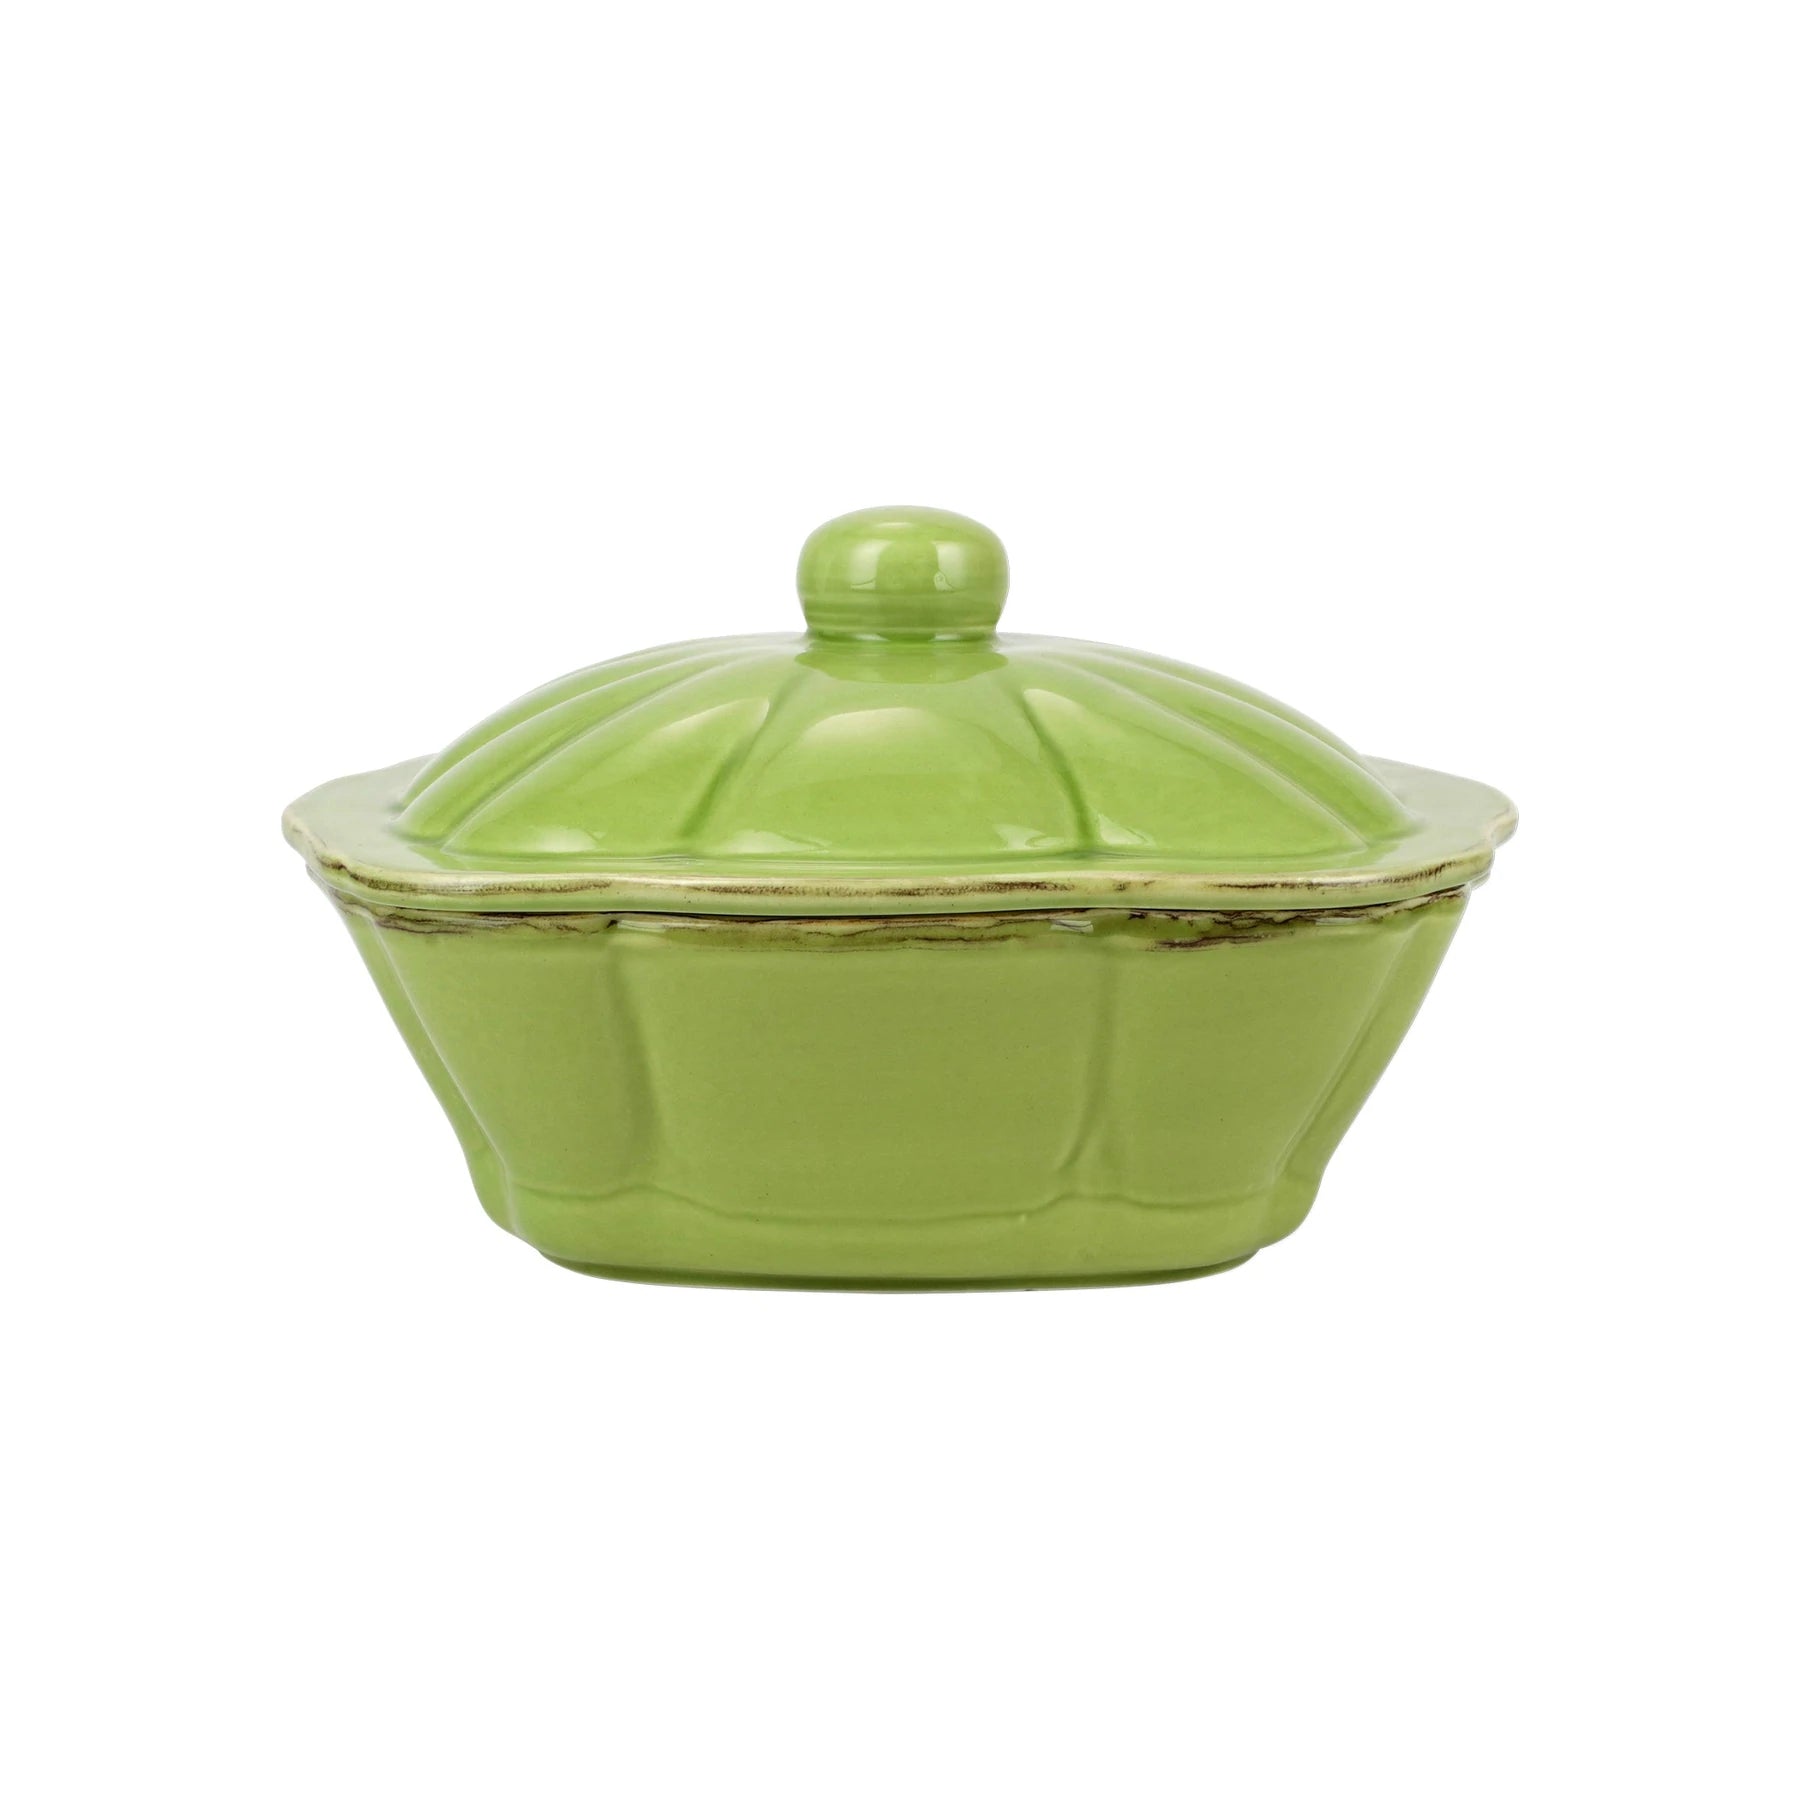 Italian Bakers Green Square Covered Casserole Dish